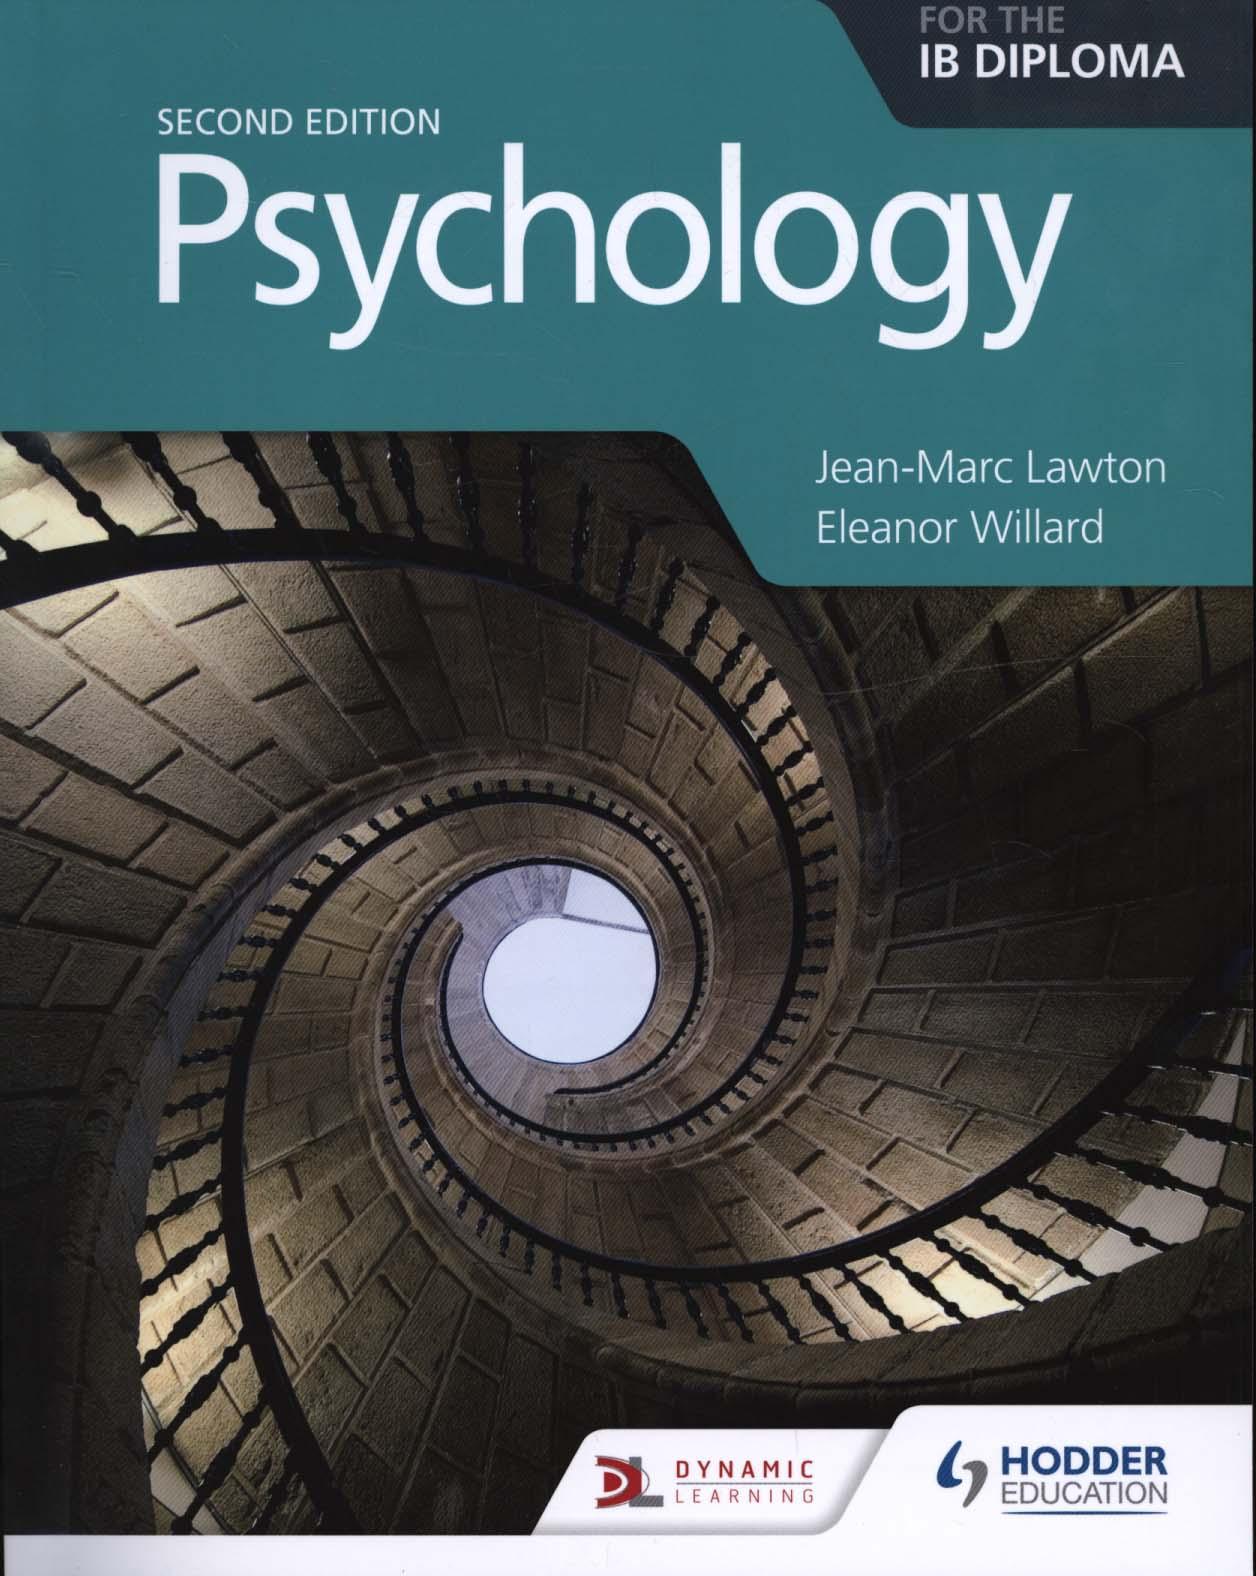 Psychology for the IB Diploma Second edition - Jean-Marc Lawton